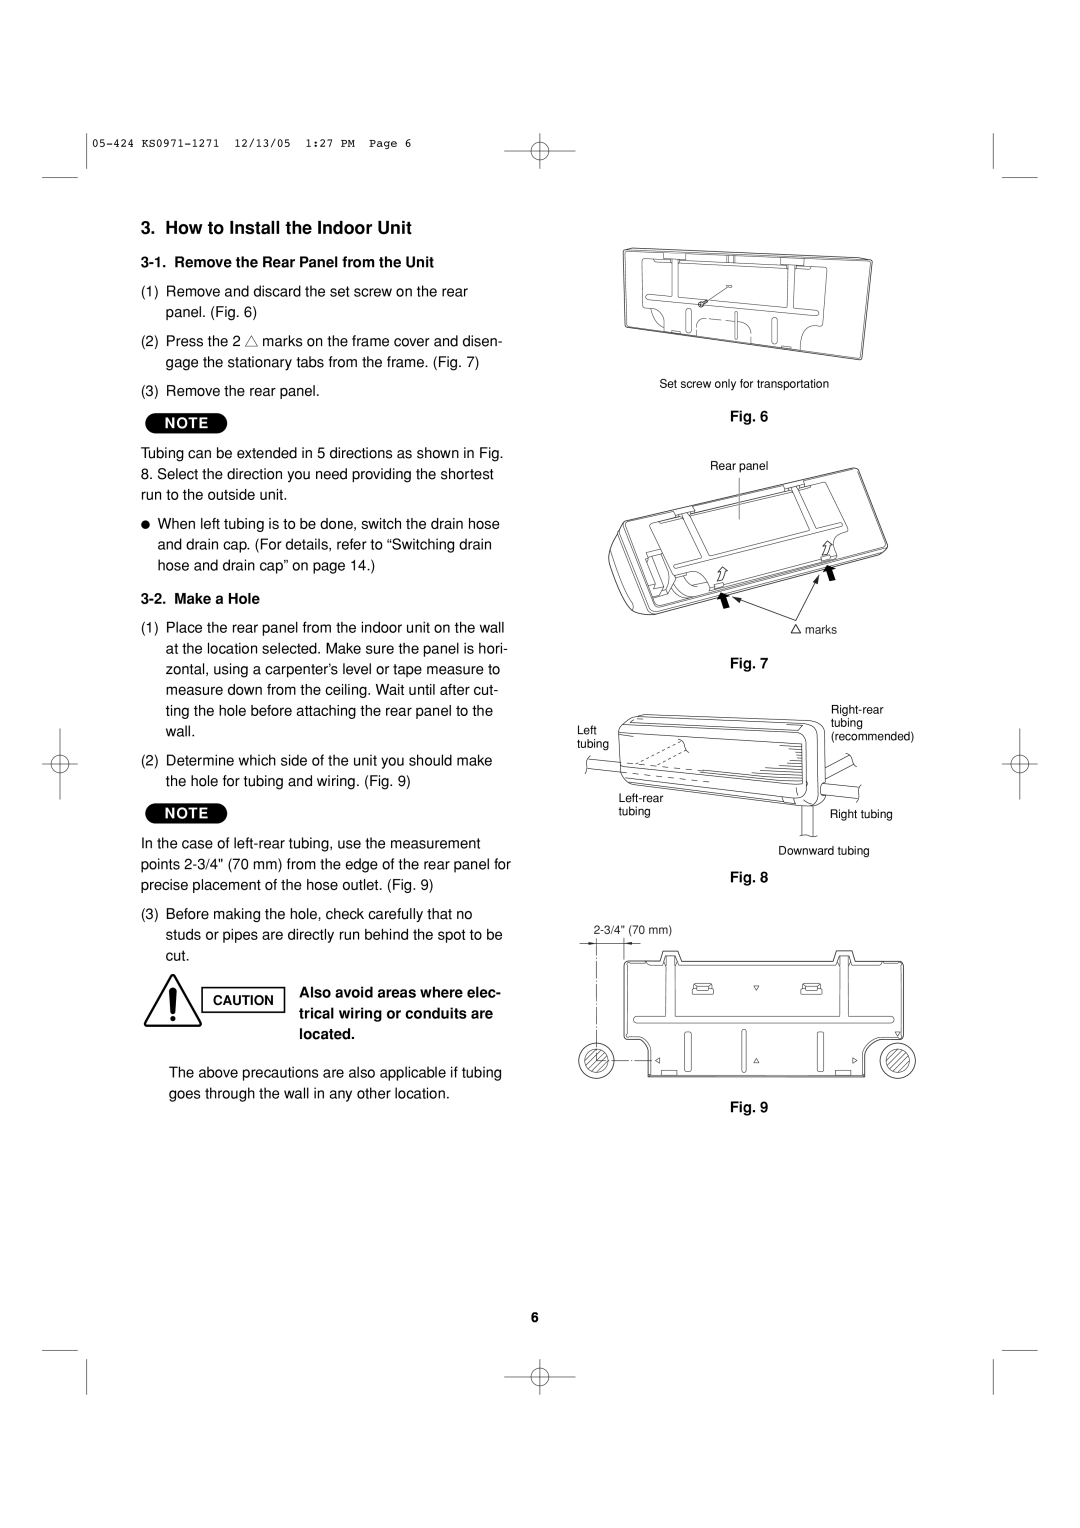 Sanyo Cool/Dry How to Install the Indoor Unit, Remove the Rear Panel from the Unit, Make a Hole, located 